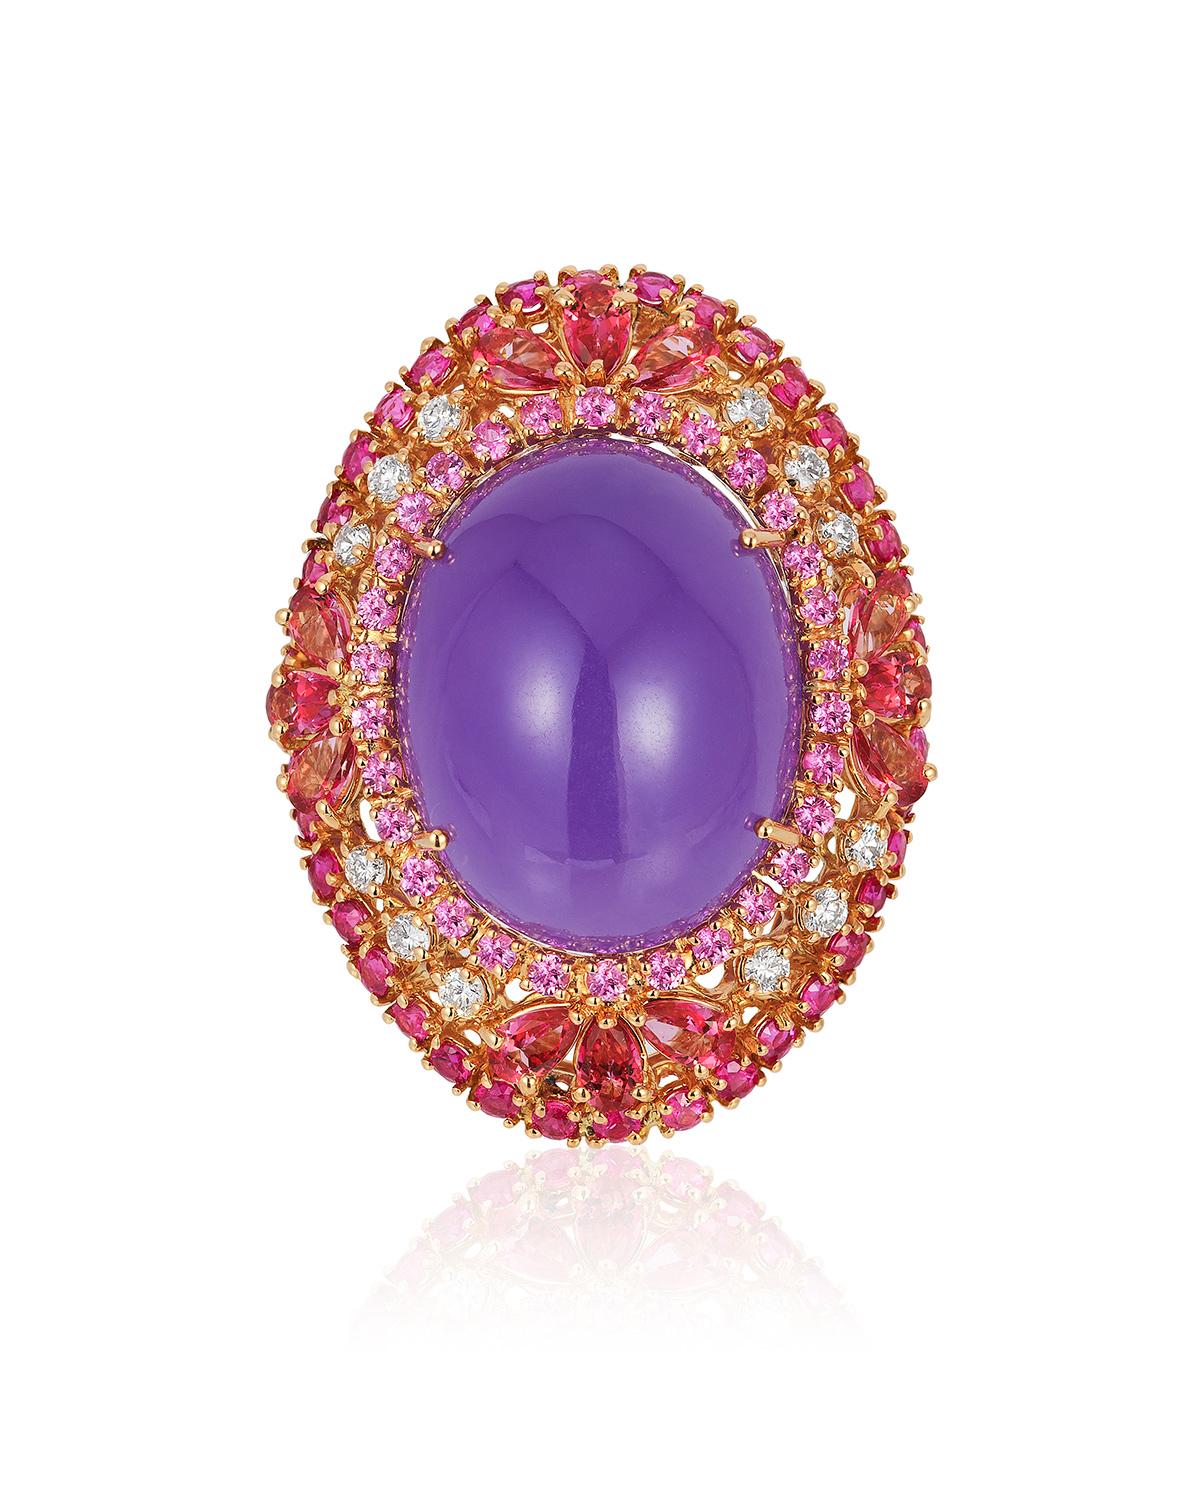 Andreoli Purple Jade Tourmaline Pink Sapphire Cocktail Dome Ring 18 Karat Rose Gold. This ring features 0.56 carats of brilliant ideal cut F-G-H Color, VS-SI Clarity Diamonds. 3.00 carats of round Pink sapphires. 2.20 carats of Tourmaline. 42.30